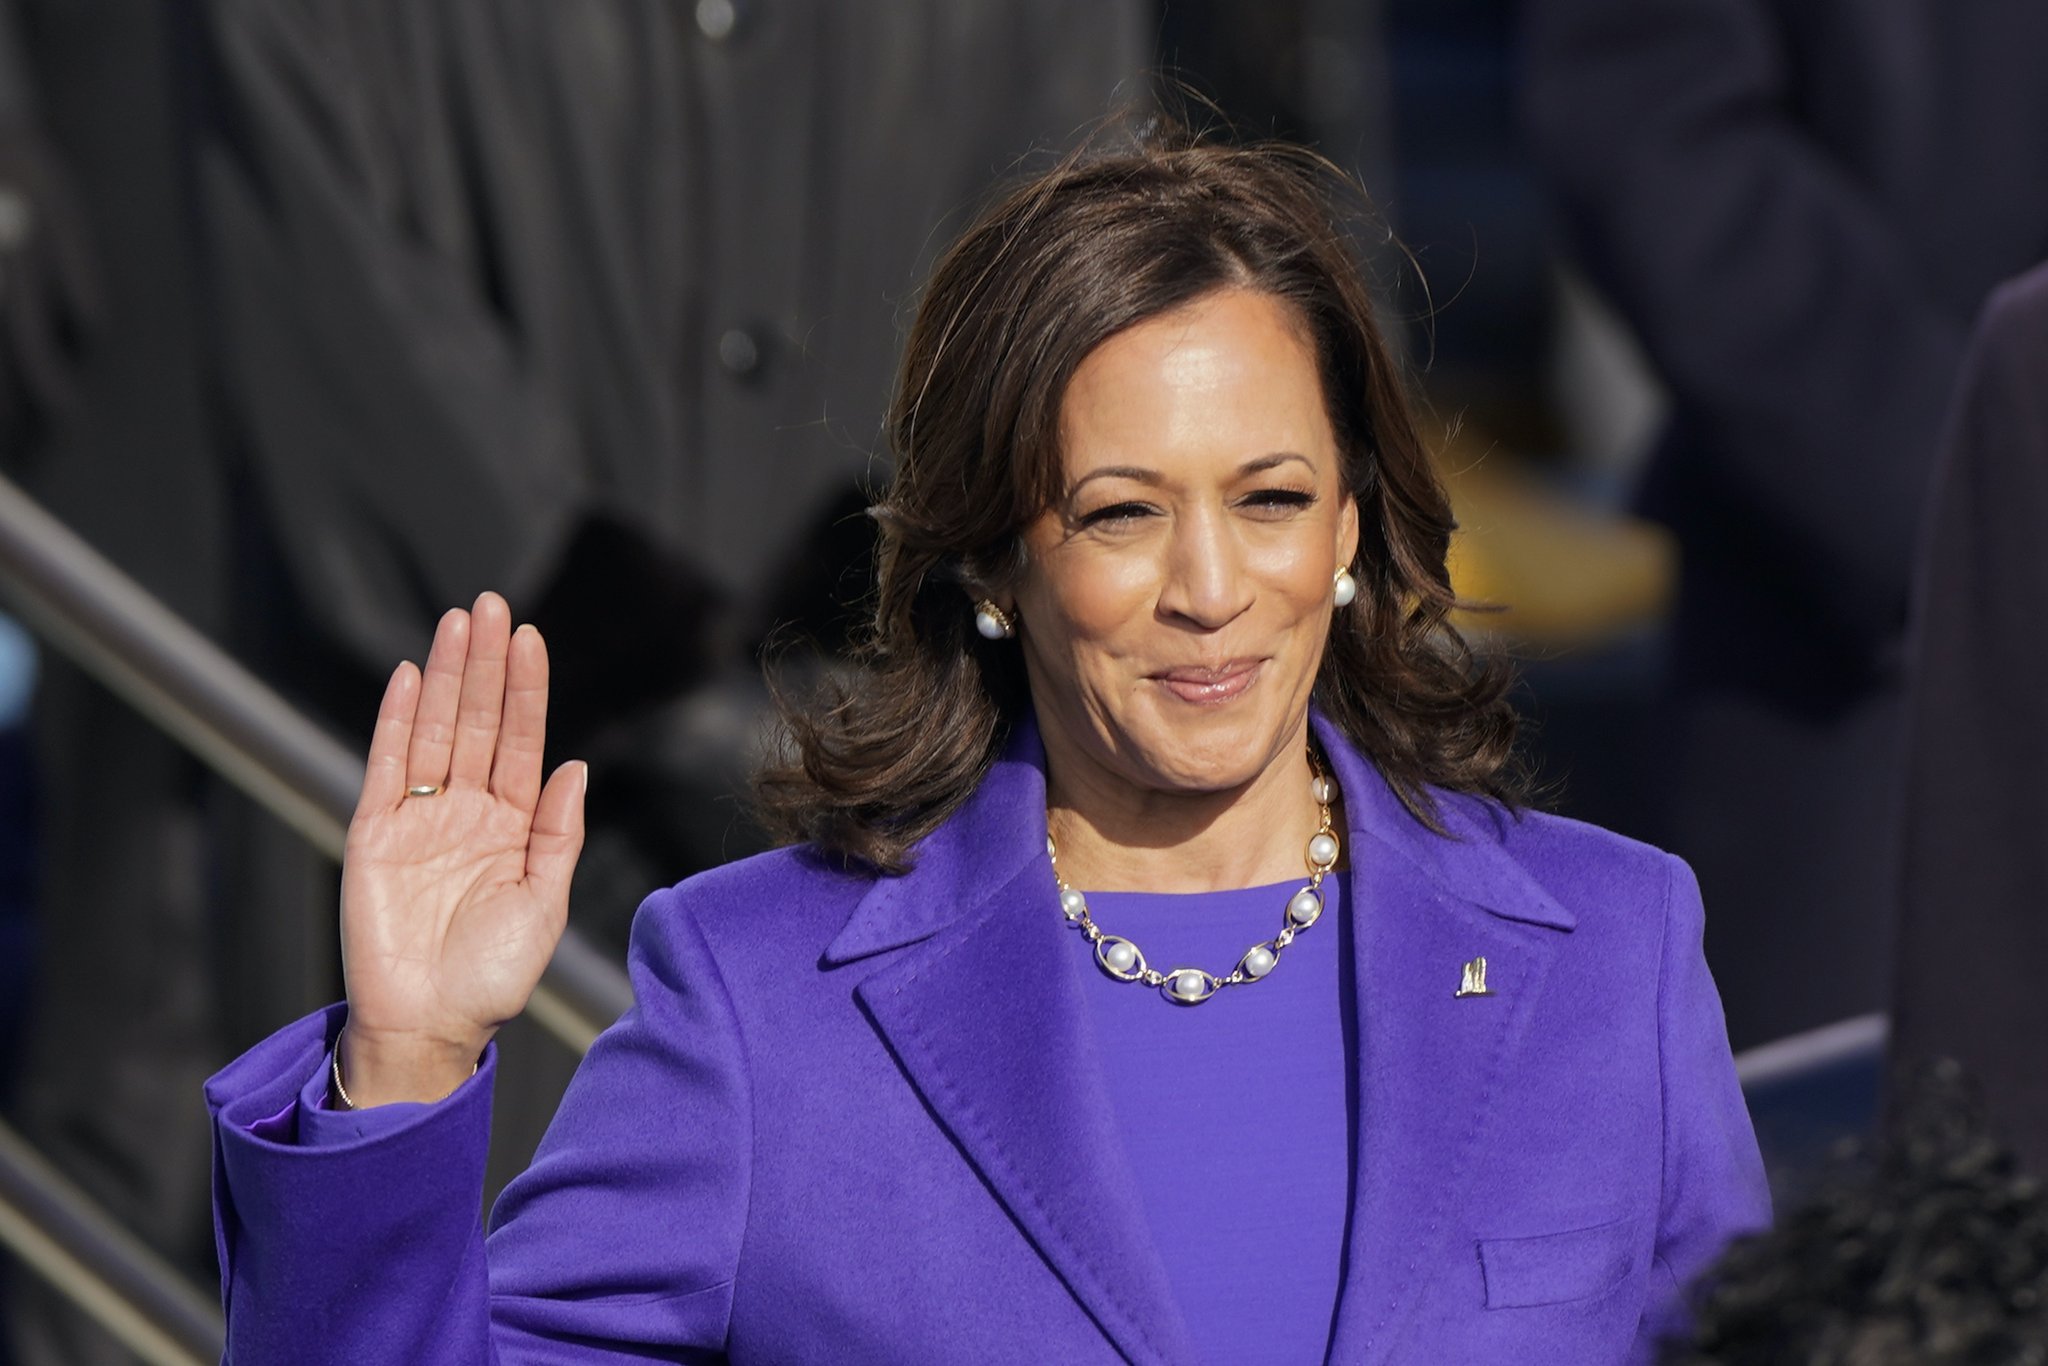 Wishing a Happy Birthday to Kamala Harris! Thank you for your hard work and service on behalf of our country. 